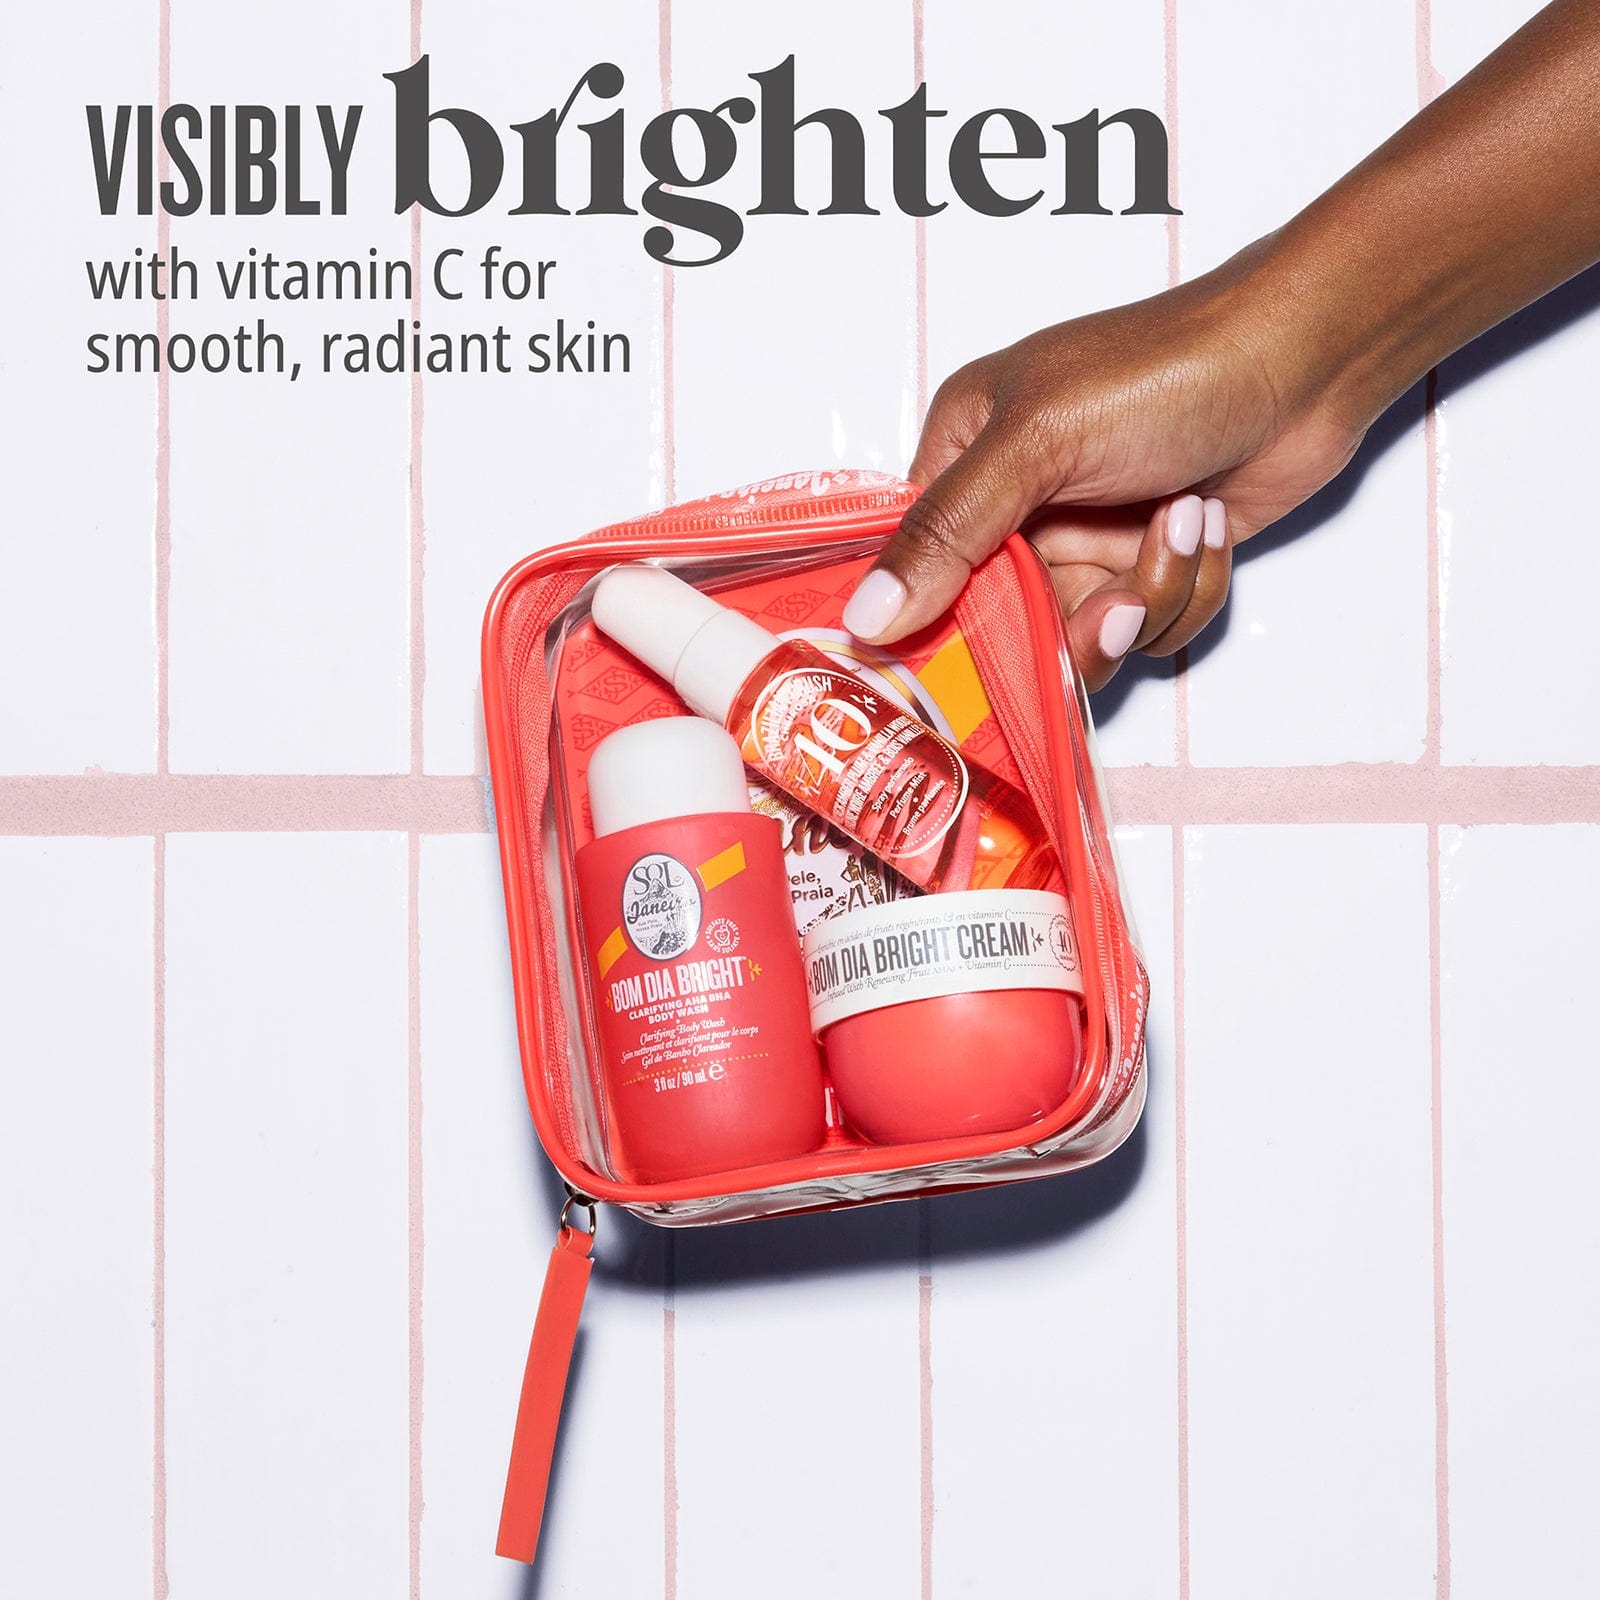 Visibly brighten with vitamin C for smooth, radiant skin | Bom Dia Jet Set | Sol de Janeiro